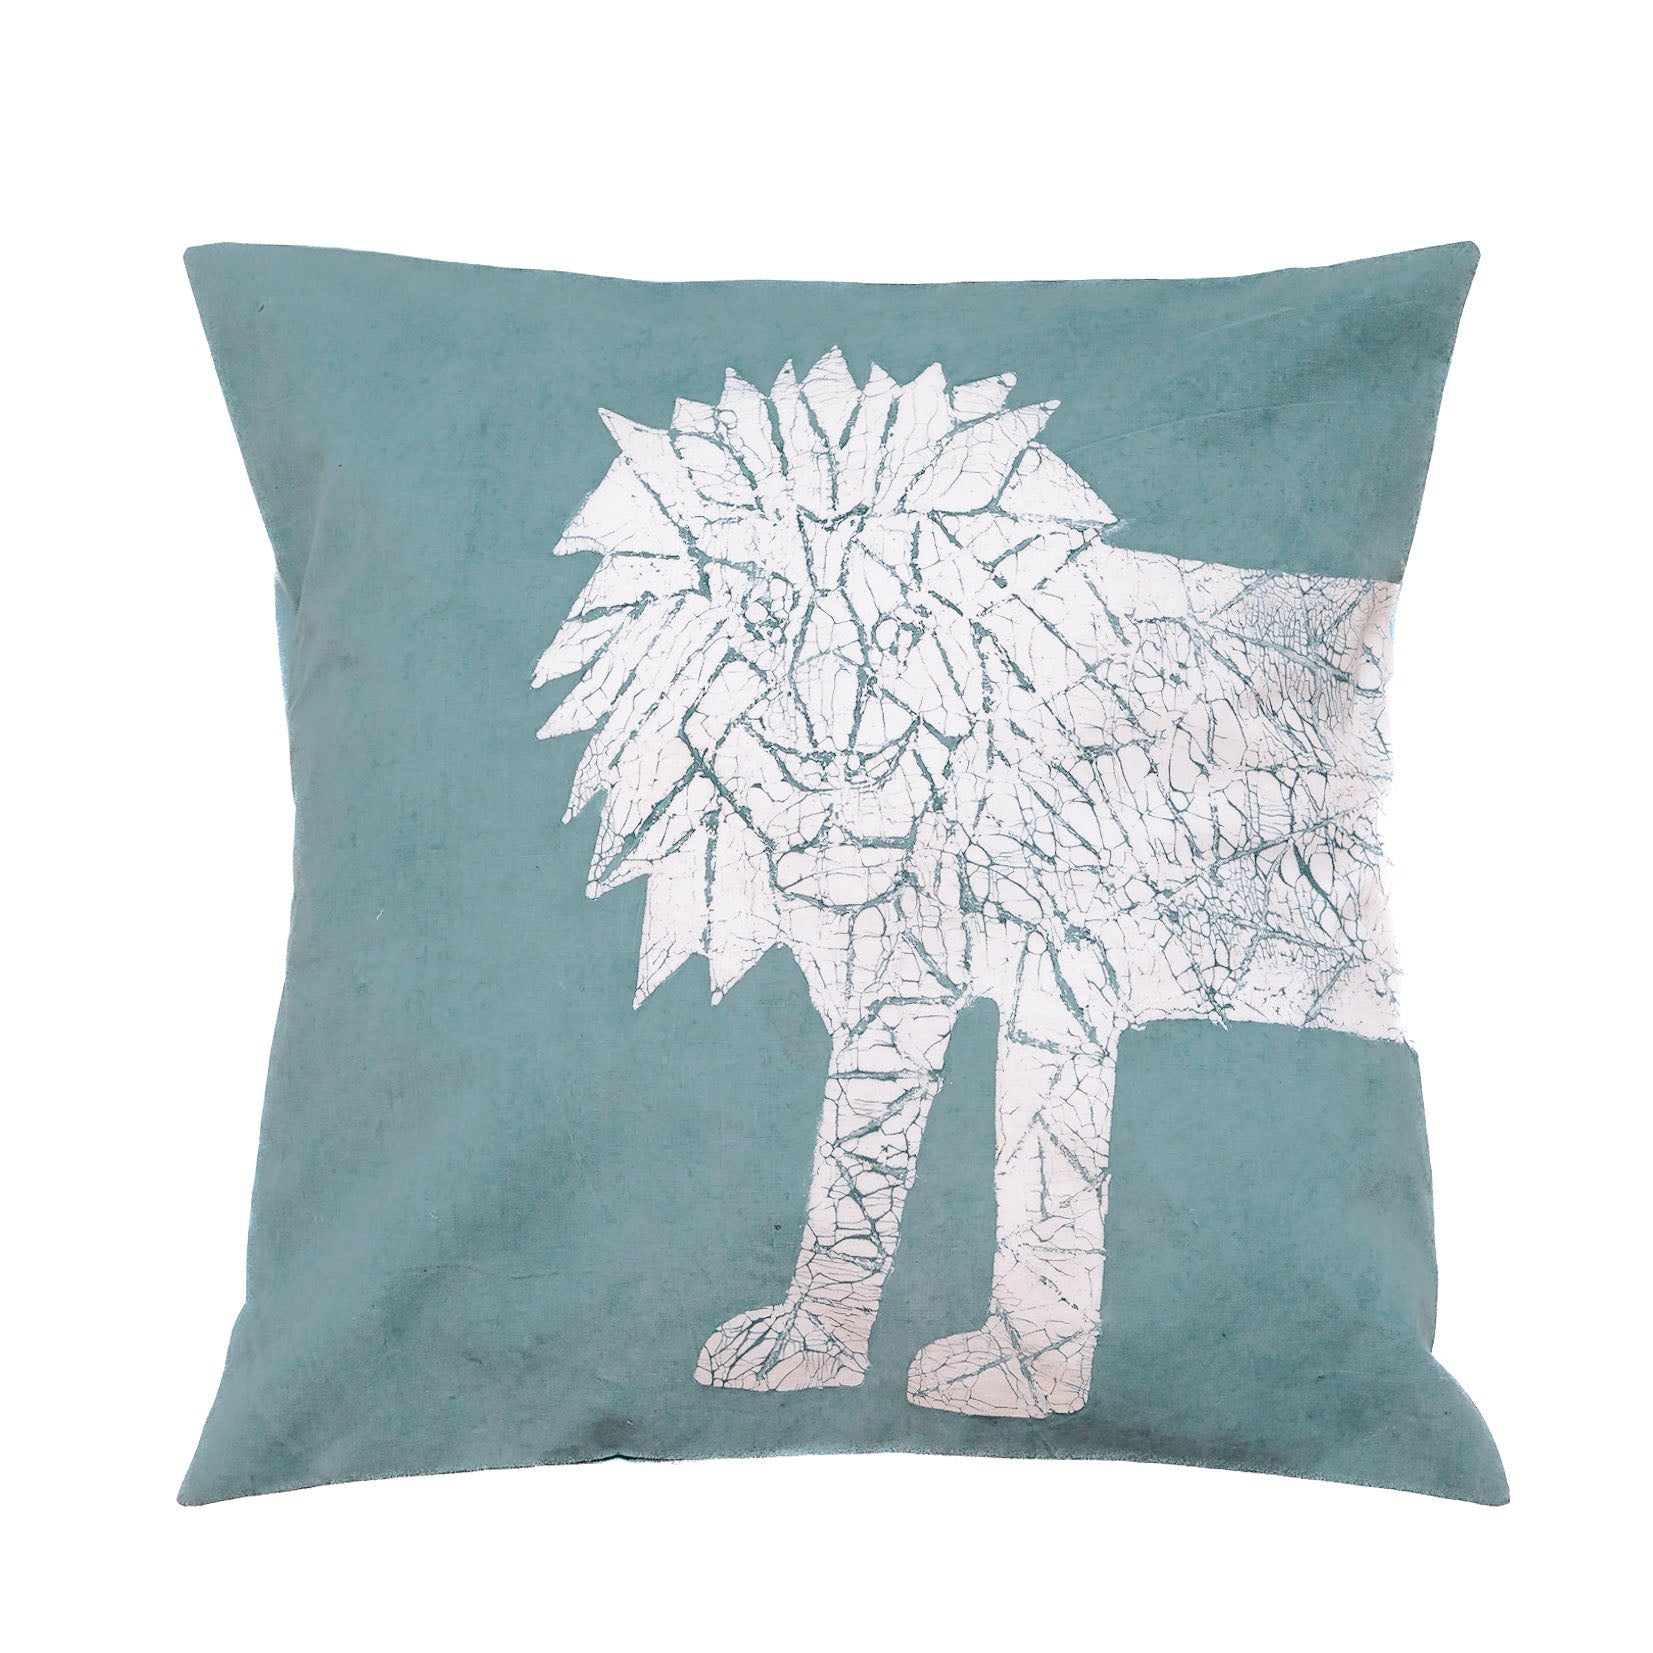 Mwana Lion Cushion Cover - Light Blue - Hand Painted by TRIBAL TEXTILES - Handcrafted Home Decor Interiors - African Made